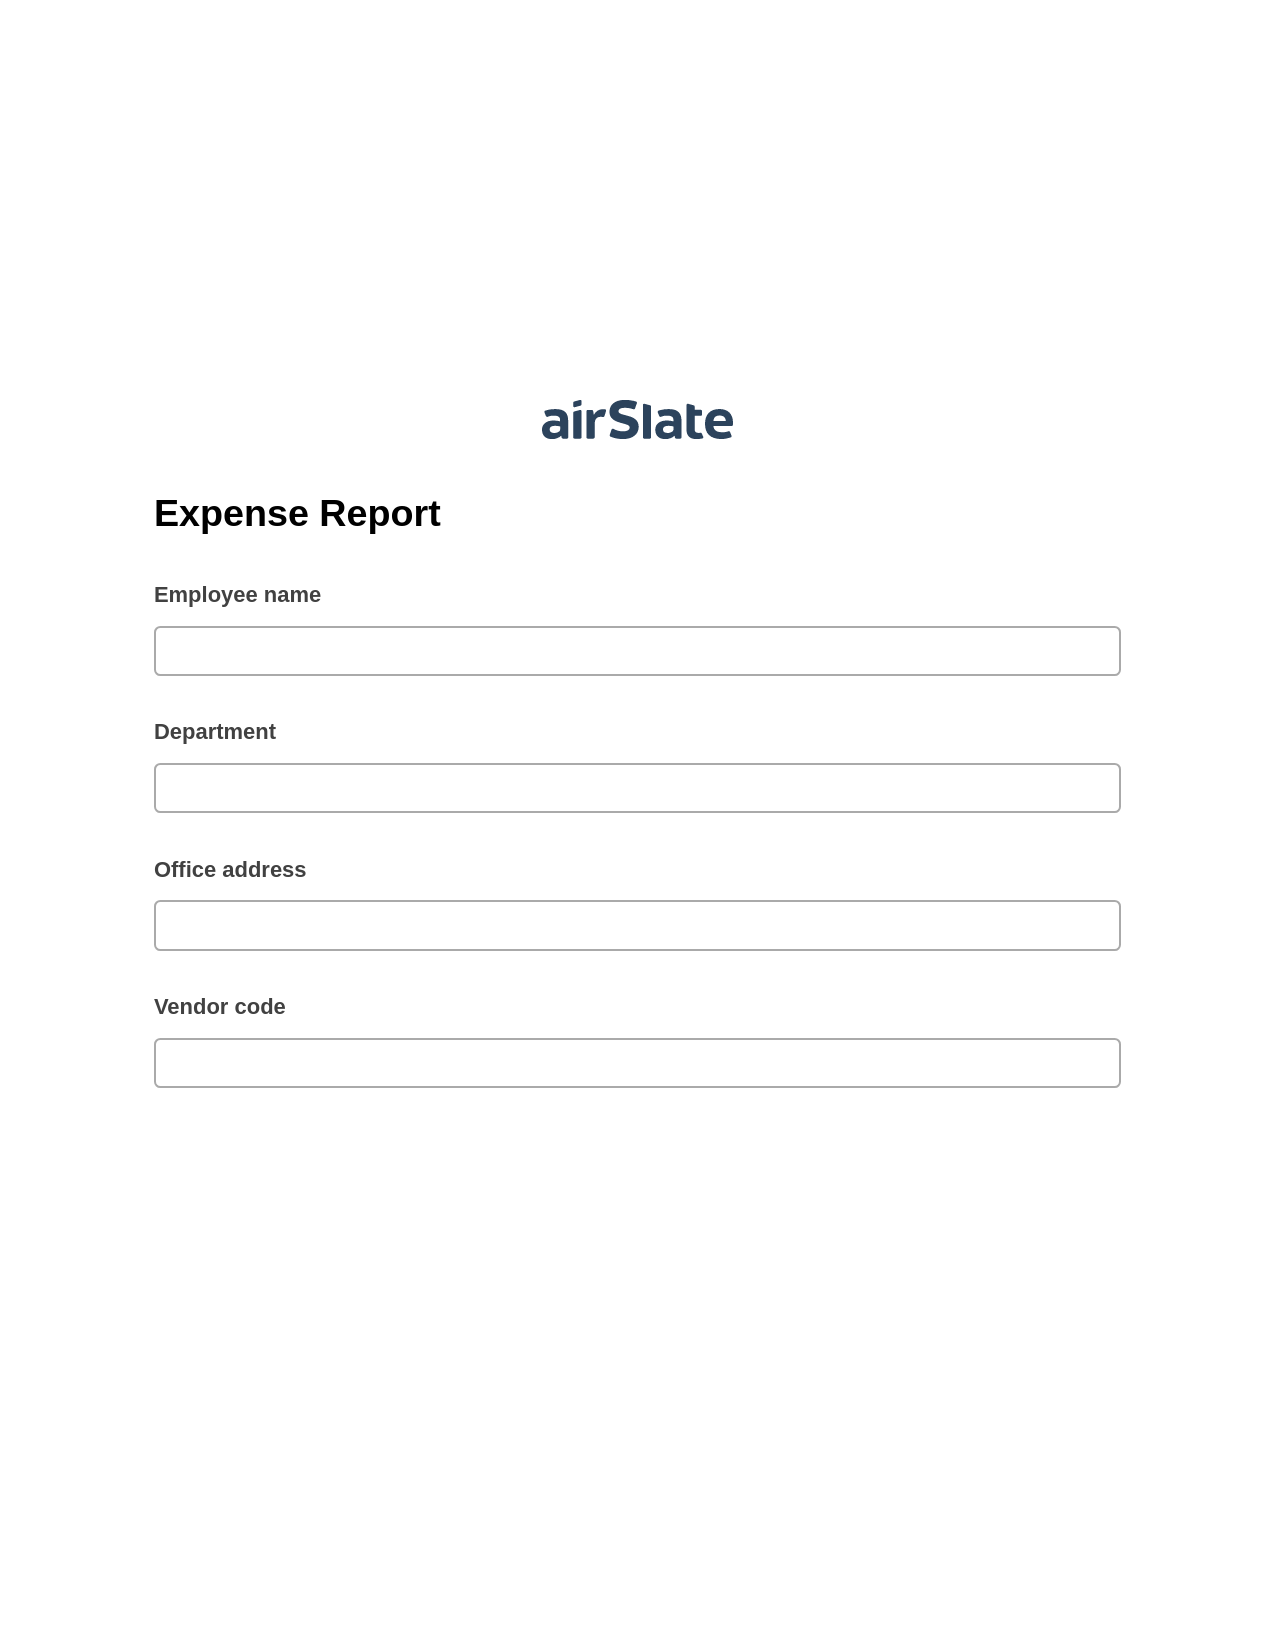 Multirole Expense Report Pre-fill from MySQL Bot, Open as Role Bot, Export to Excel 365 Bot